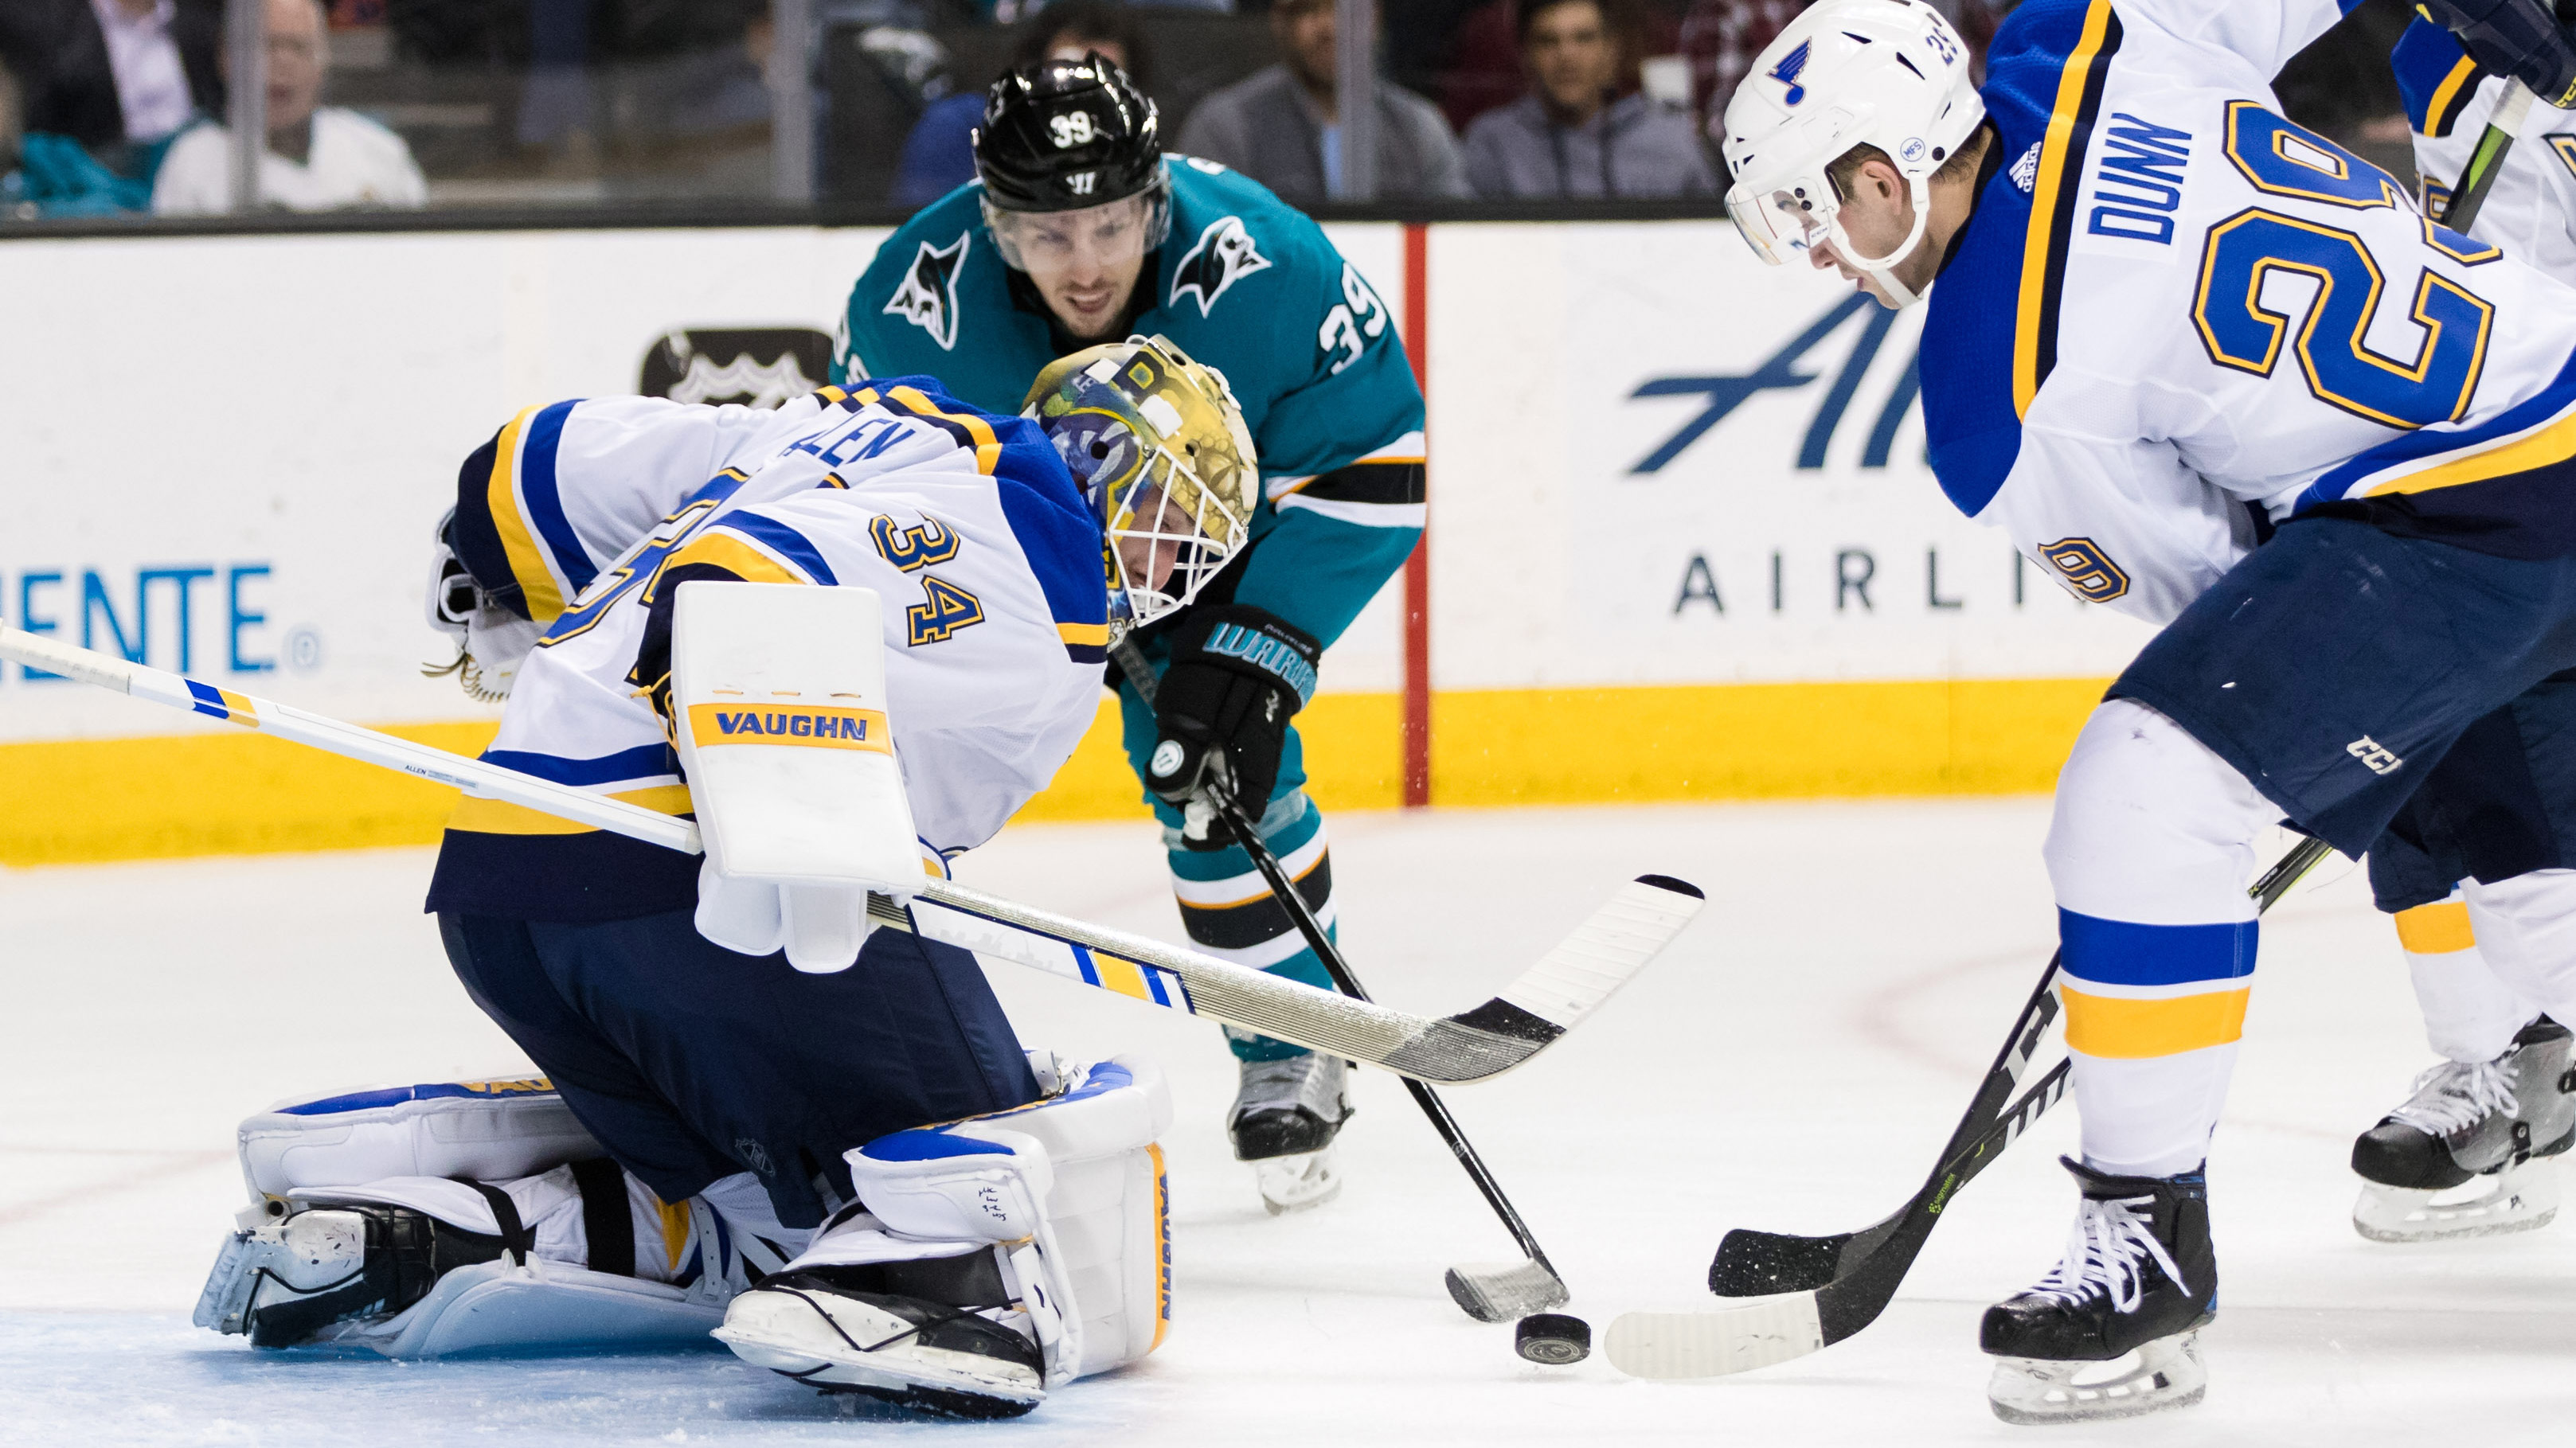 Allen's strong night spoiled as Sharks blank Blues 2-0